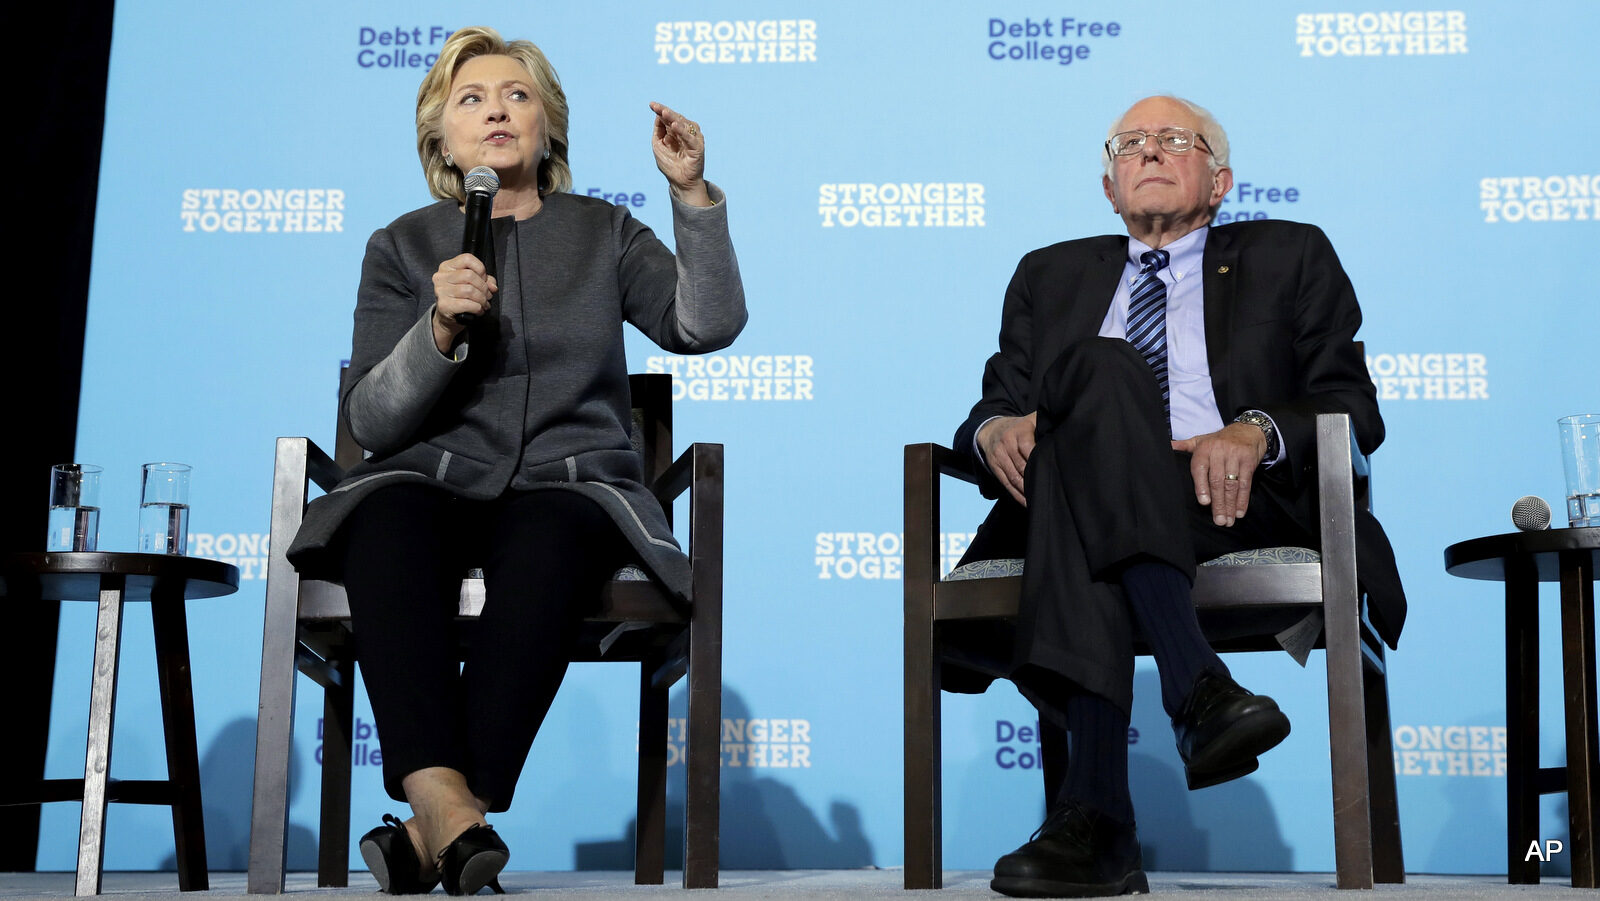 Democratic presidential candidate Hillary Clinton and Sen. Bernie Sanders, I-Vt. participate in a panel discussion during a campaign stop at the University Of New Hampshire in Durham, N.H., Wednesday, Sept. 28, 2016.